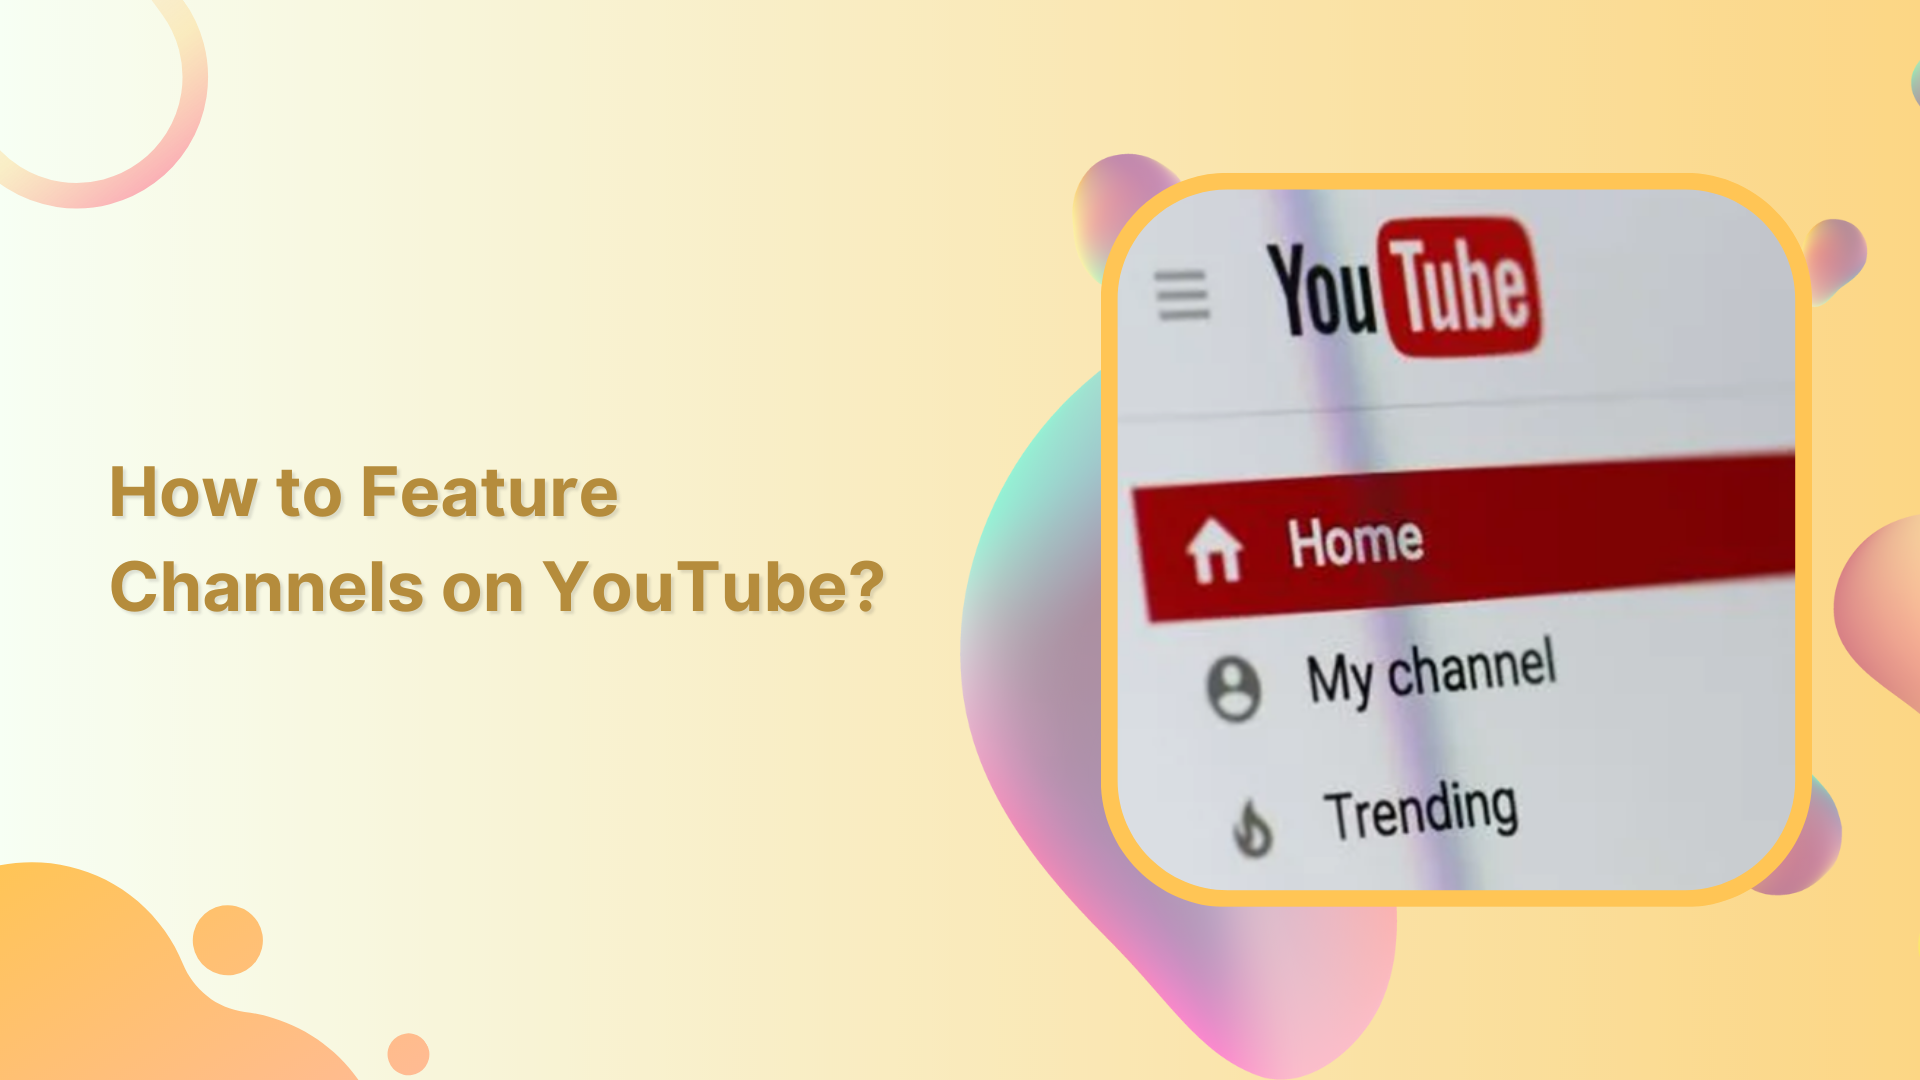 How to Feature Channels on YouTube